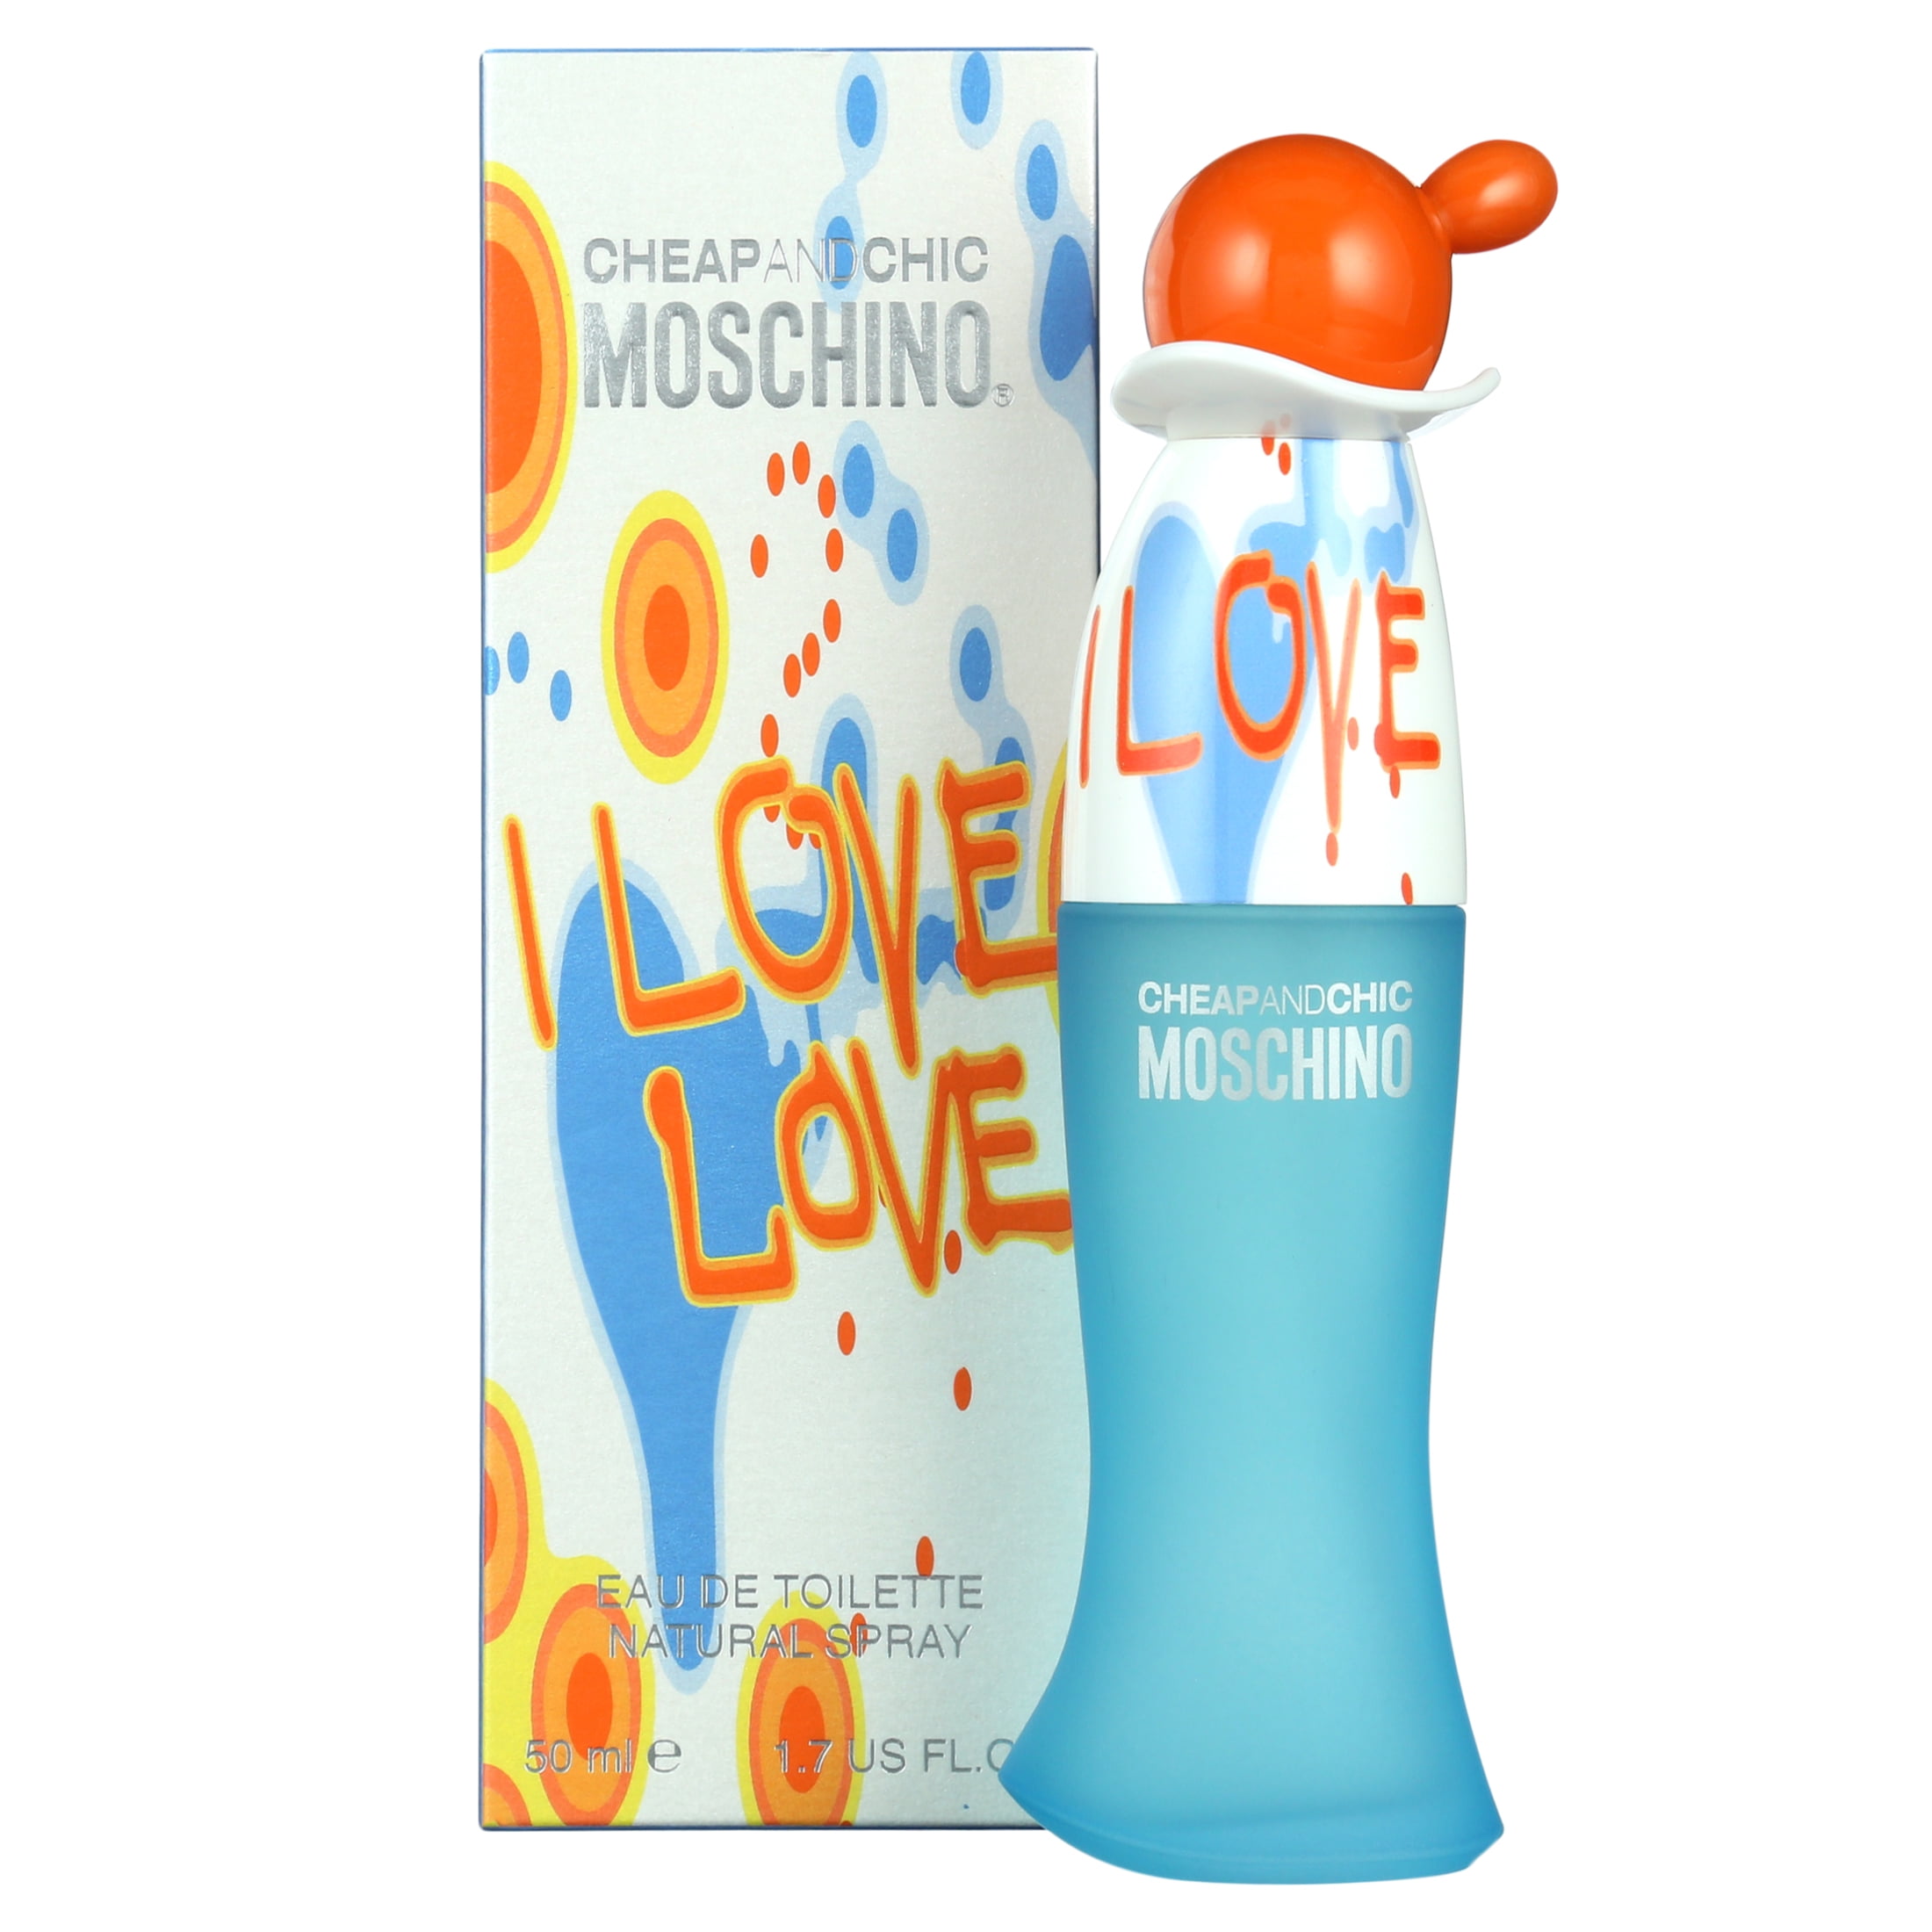 I Love Love Cheap and Chic by Moschino for Women - 1.7 oz EDT Spray ...